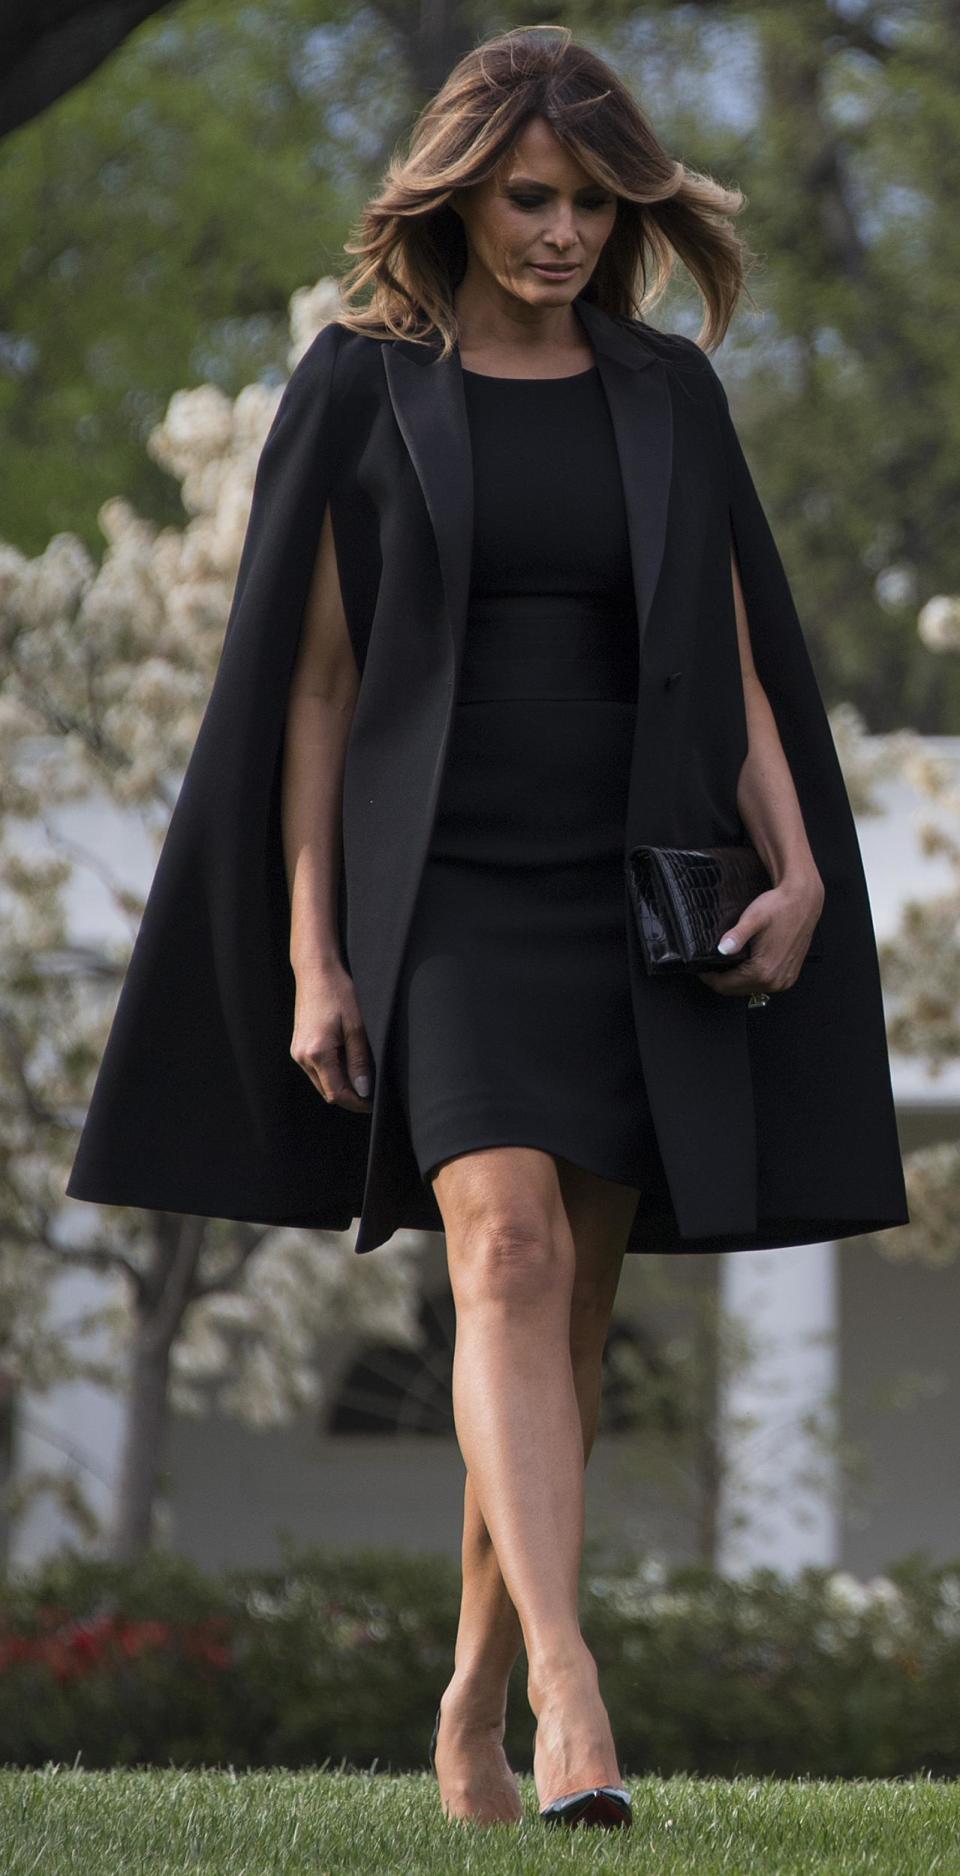 Melania Trump walks outside the White House as US President Donald Trump welcome French President Emmanuel Macron and his wife Brigitte Macron (AFP/Getty Images)